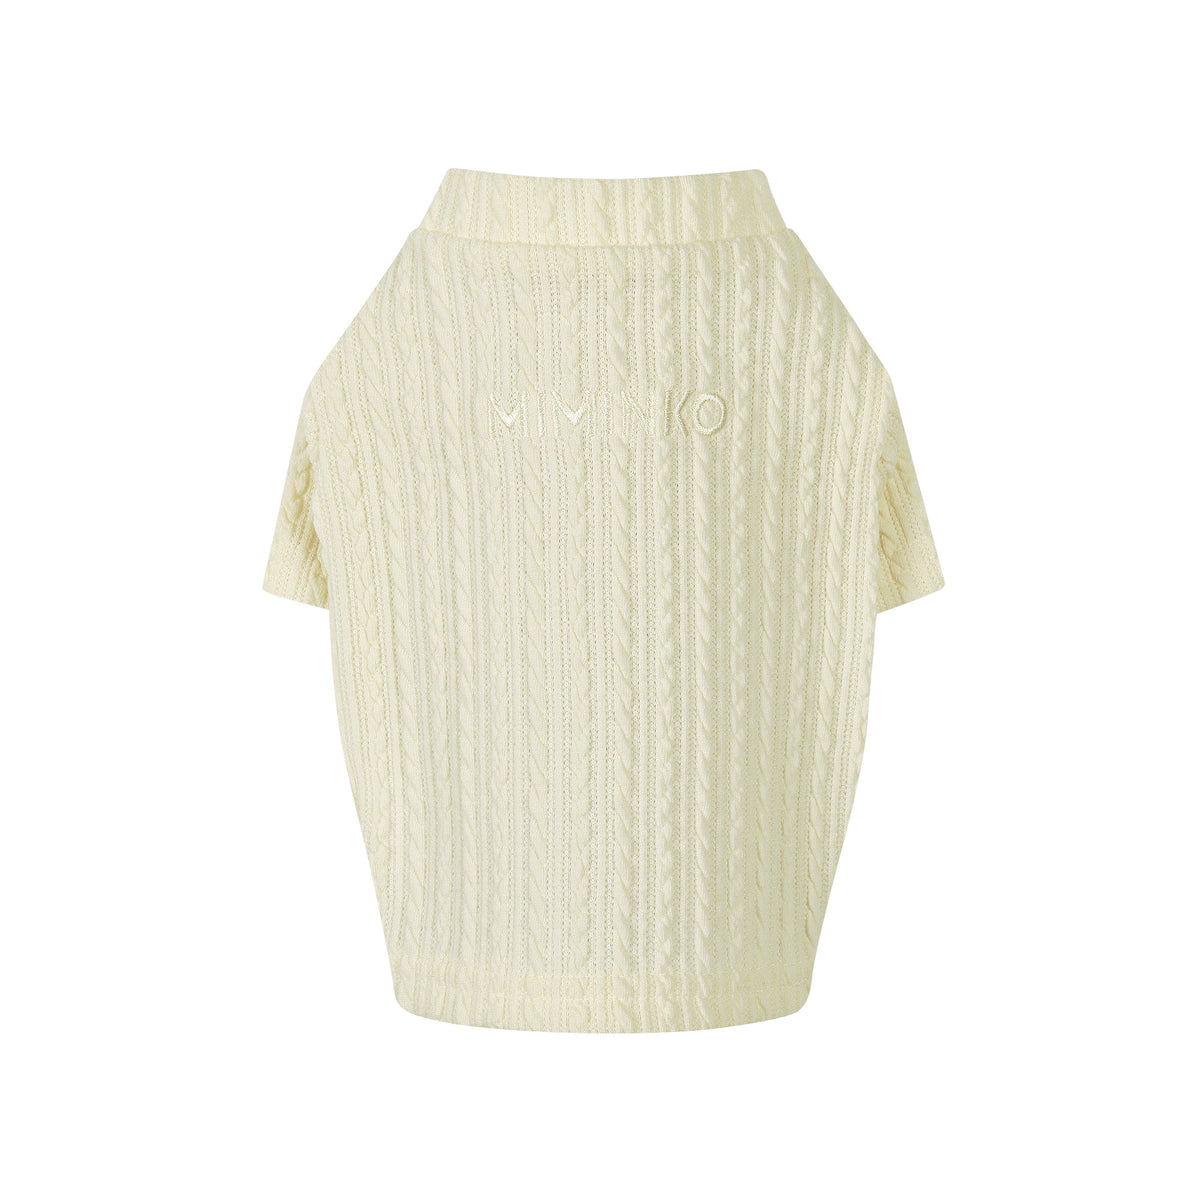 Sweater Weather Top - Off White